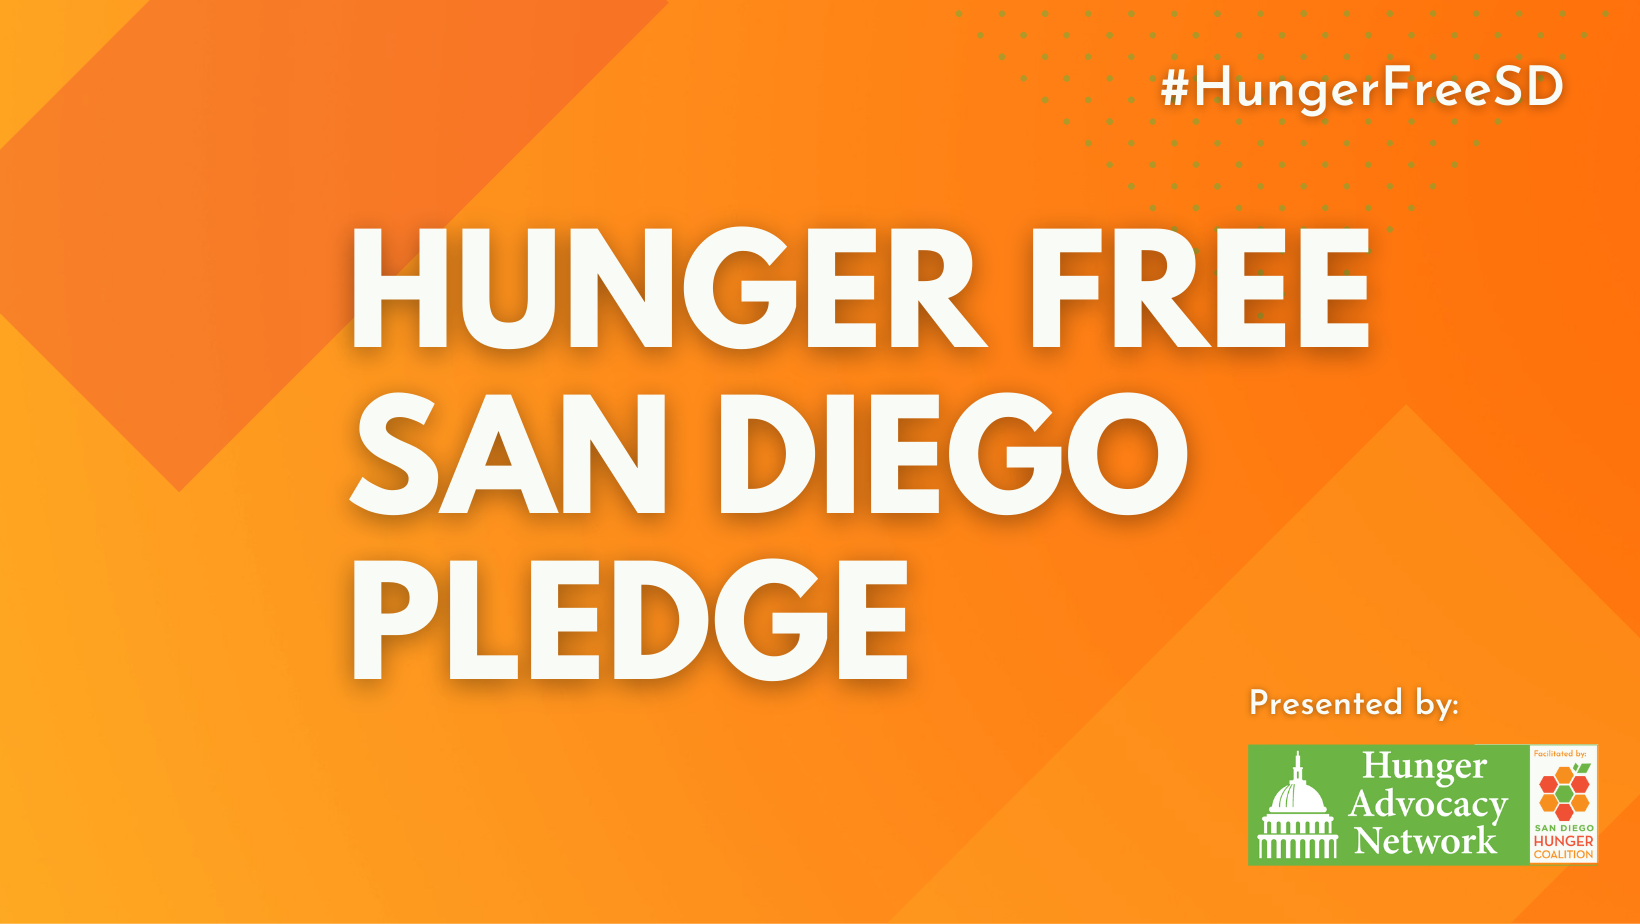 Hunger Awareness Month September 2021 #HungerFreeSD Presented by Hunger Advocacy Network